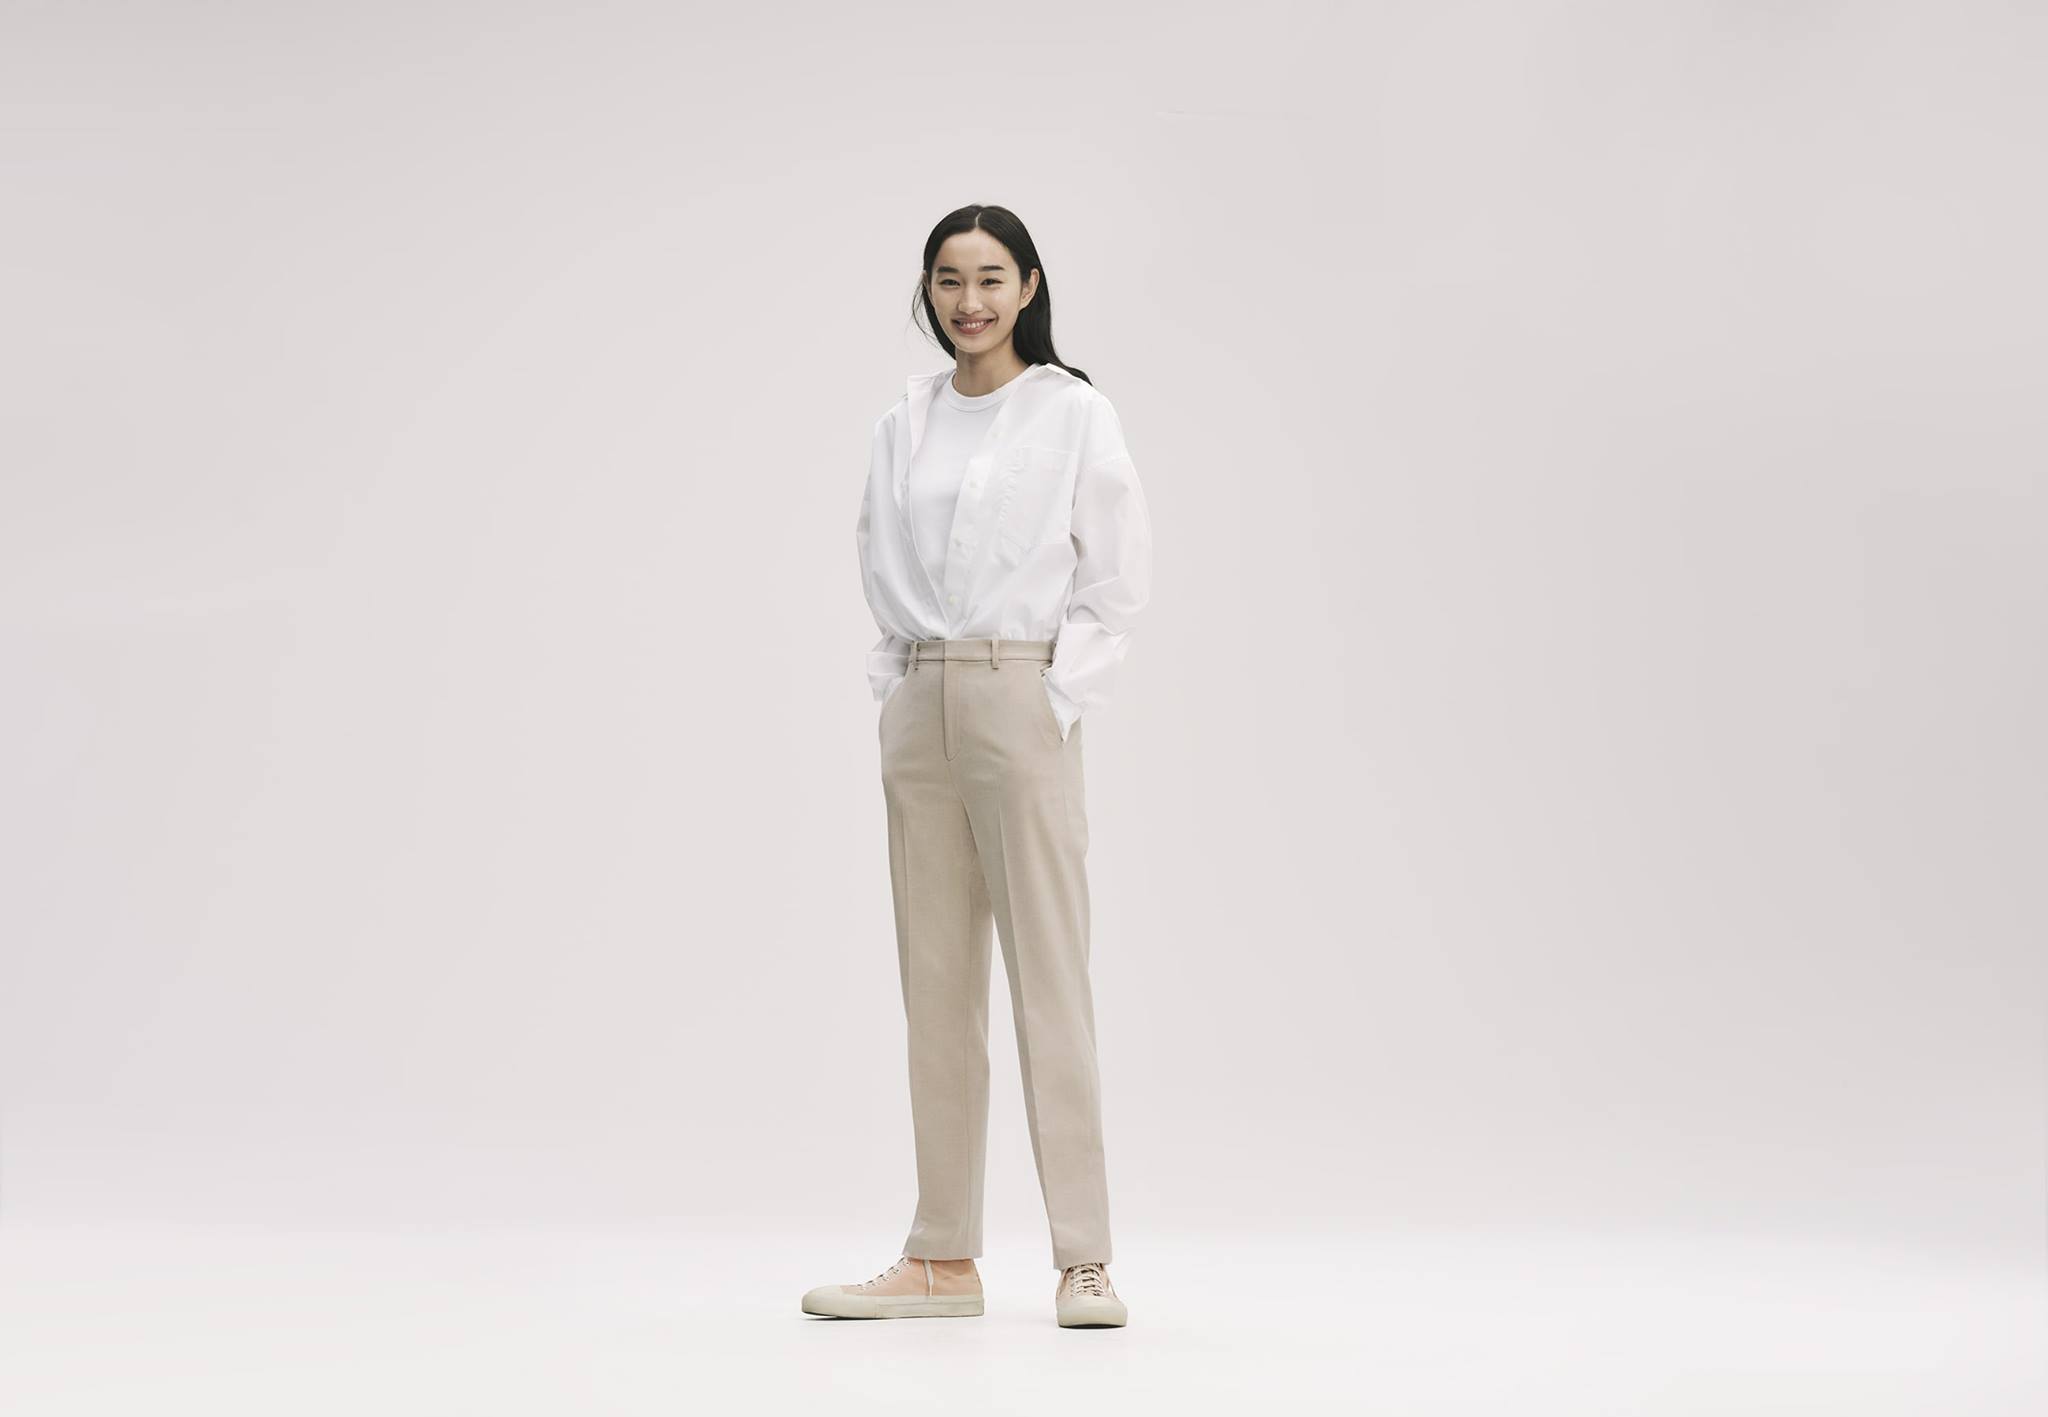 UNIQLO Introduces Its Latest EZY Ankle Pants Collection With Its 2Way  Stretch Fabric and New Silhouettes  Orange Magazine